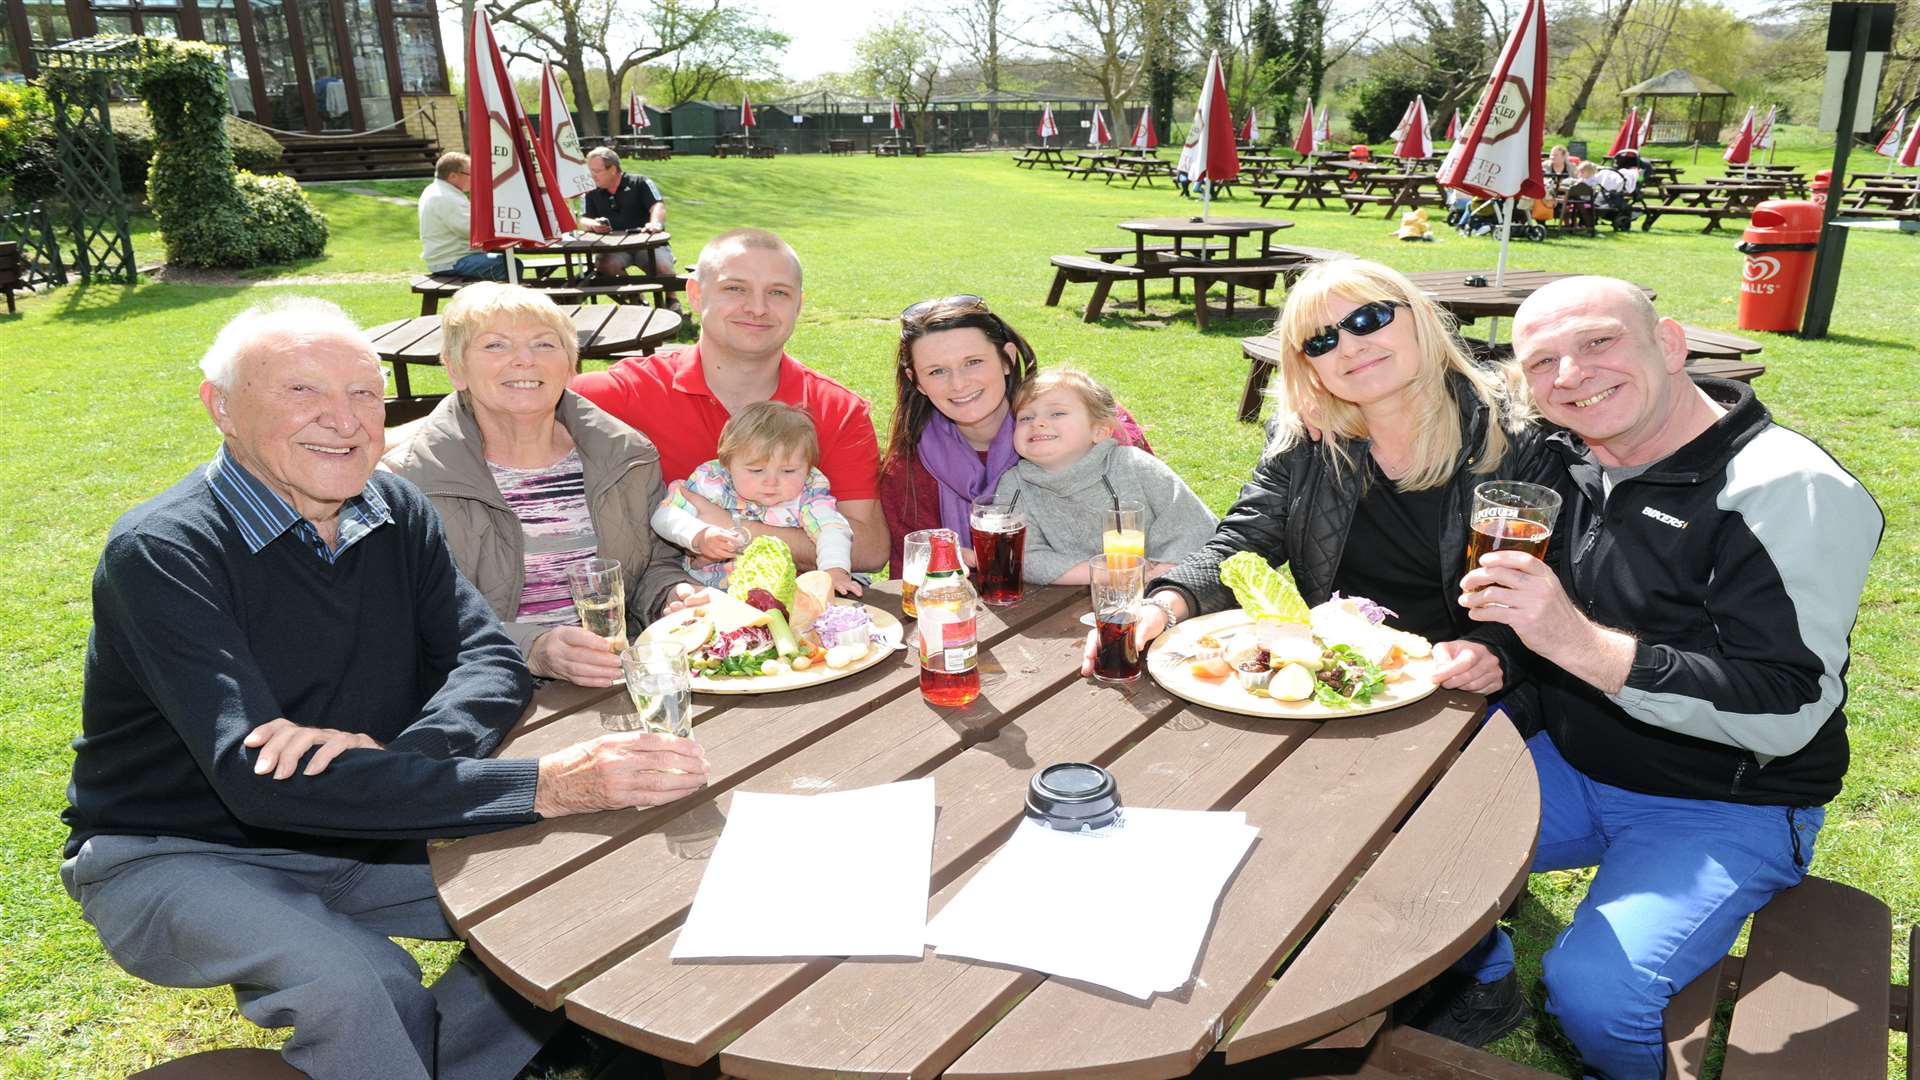 Four generations of the Langley family enjoying a meal in the garden